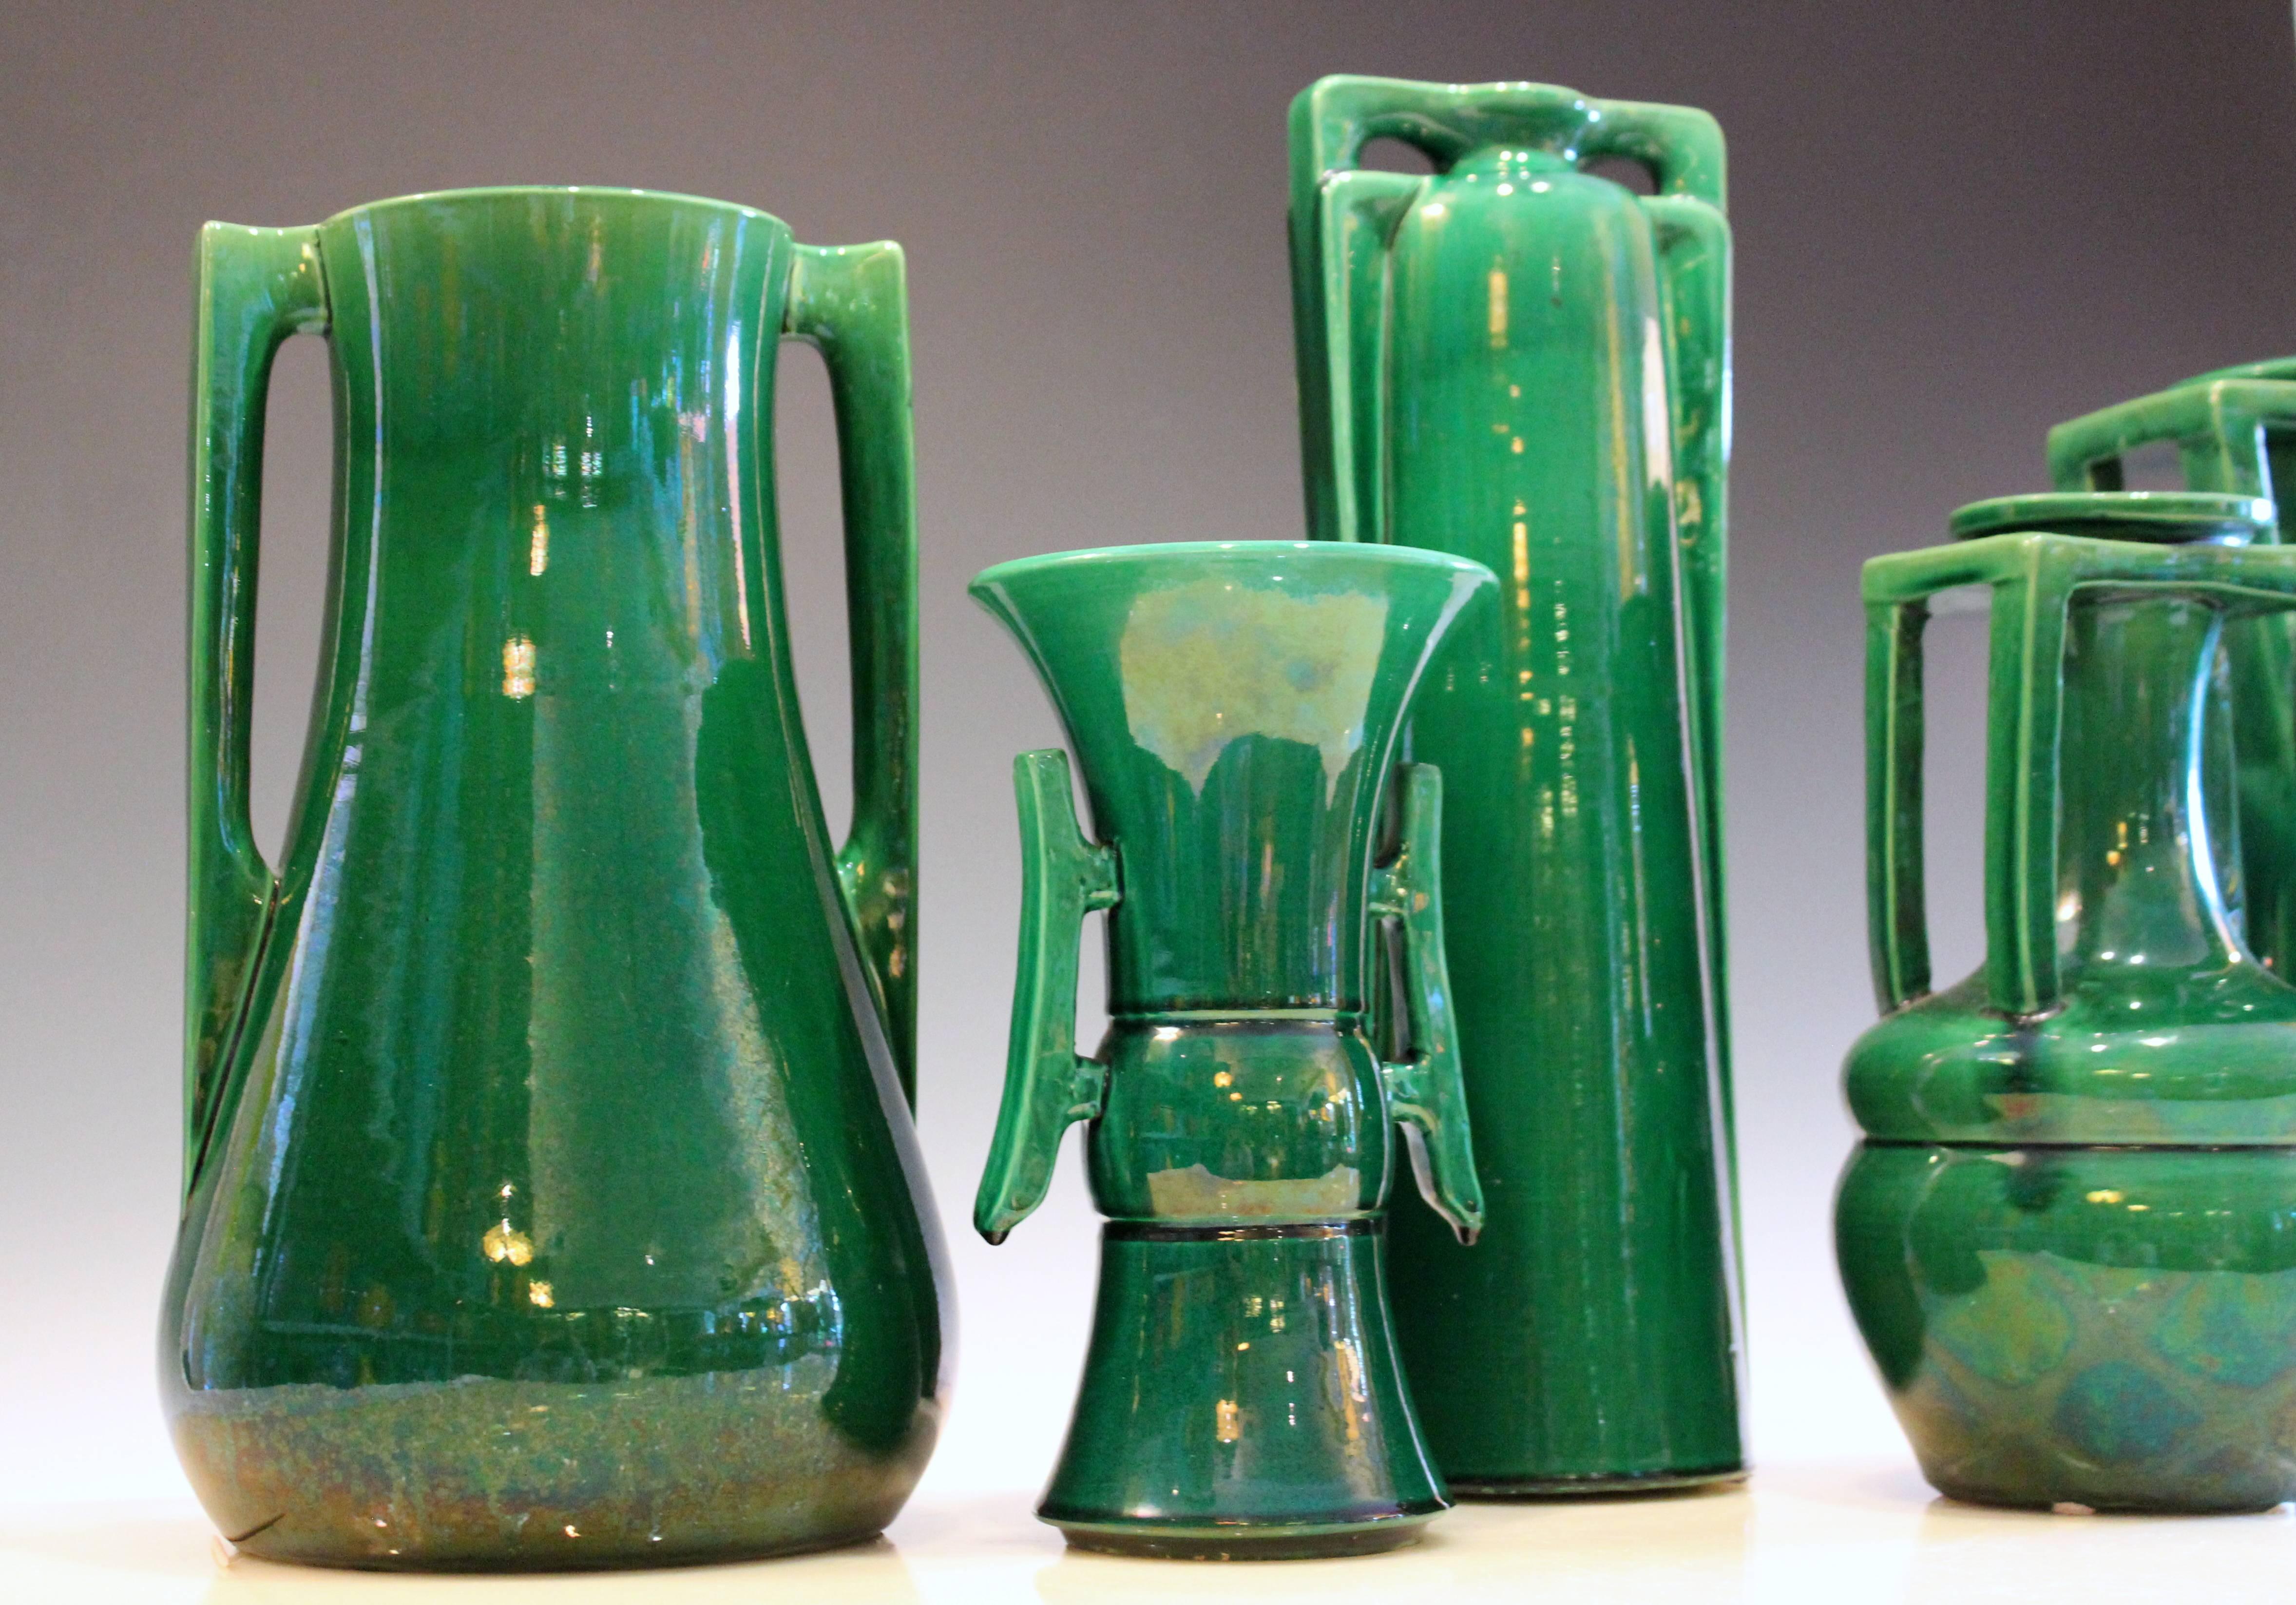 Japanese Awaji Pottery Art Deco Architectural Buttress Handled Vases, circa 1920